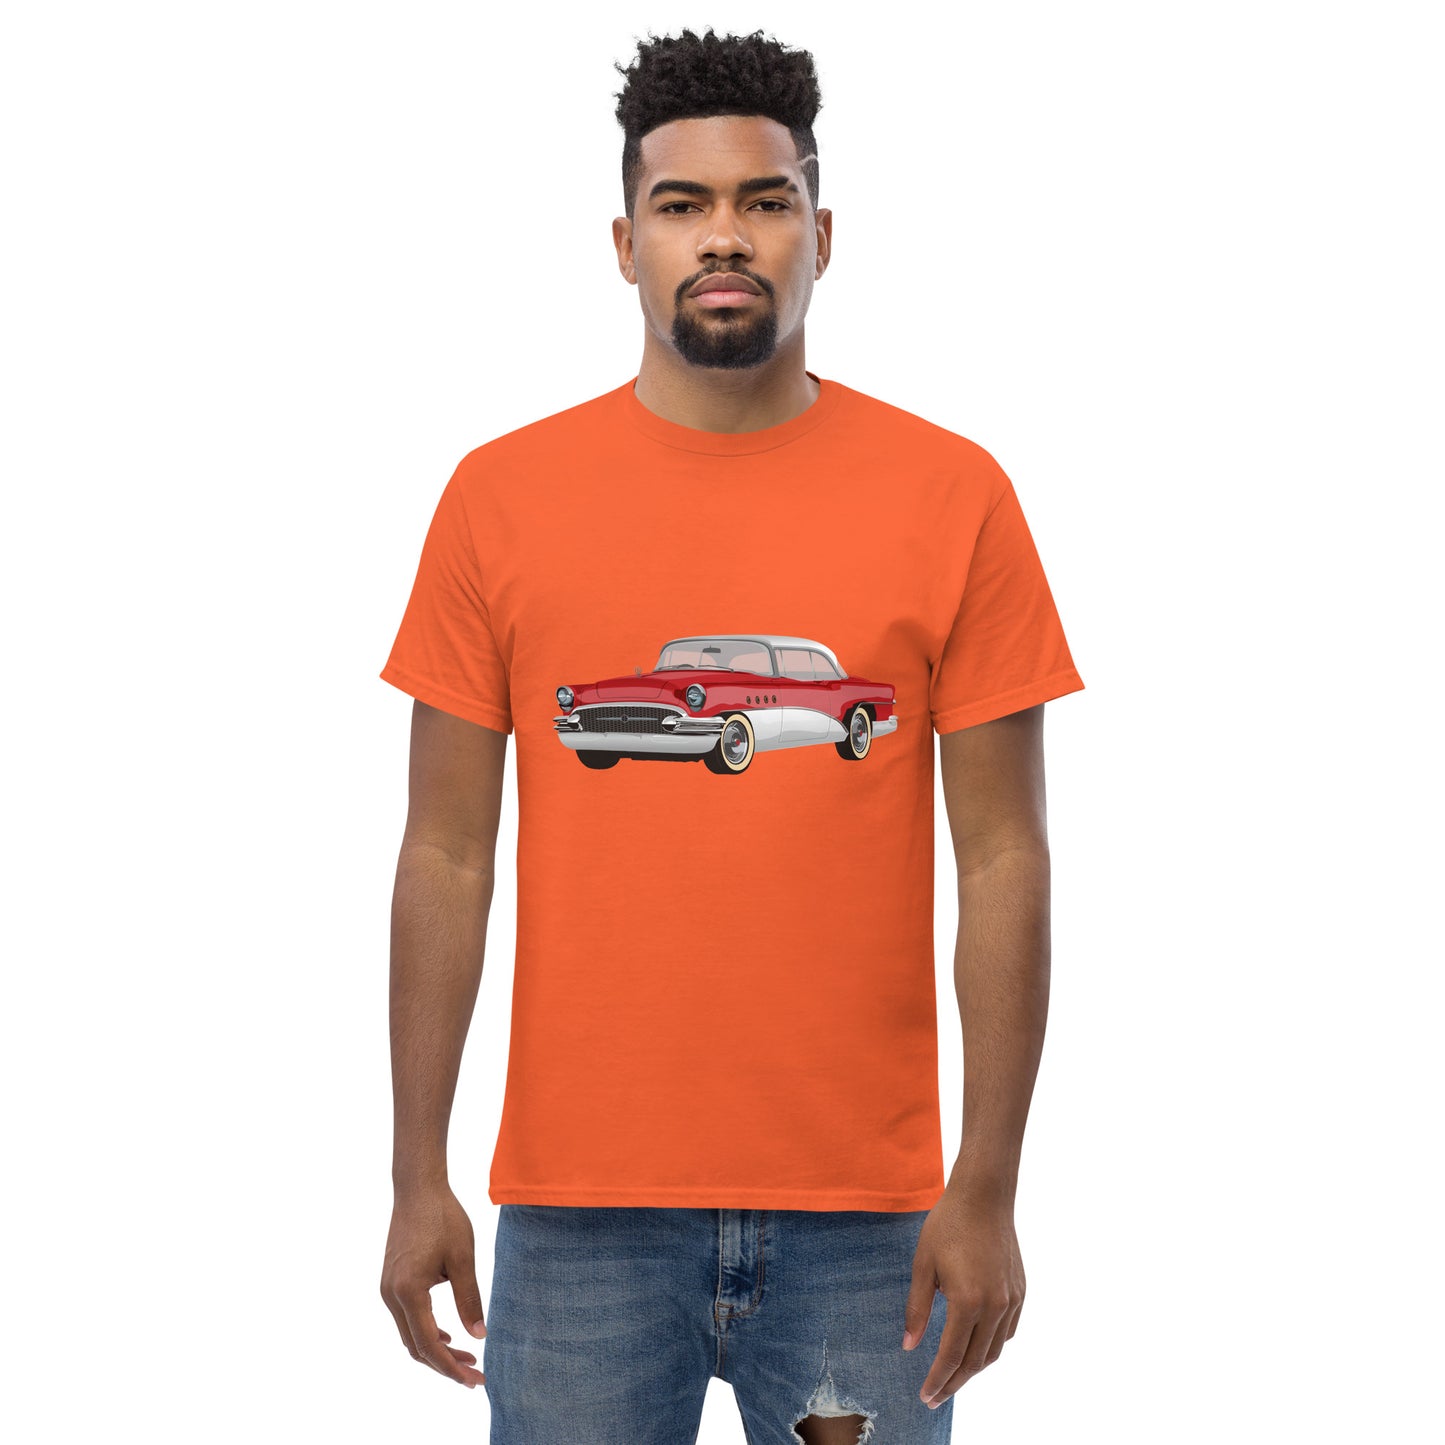 Men with orange t-shirt with red Chevrolet 